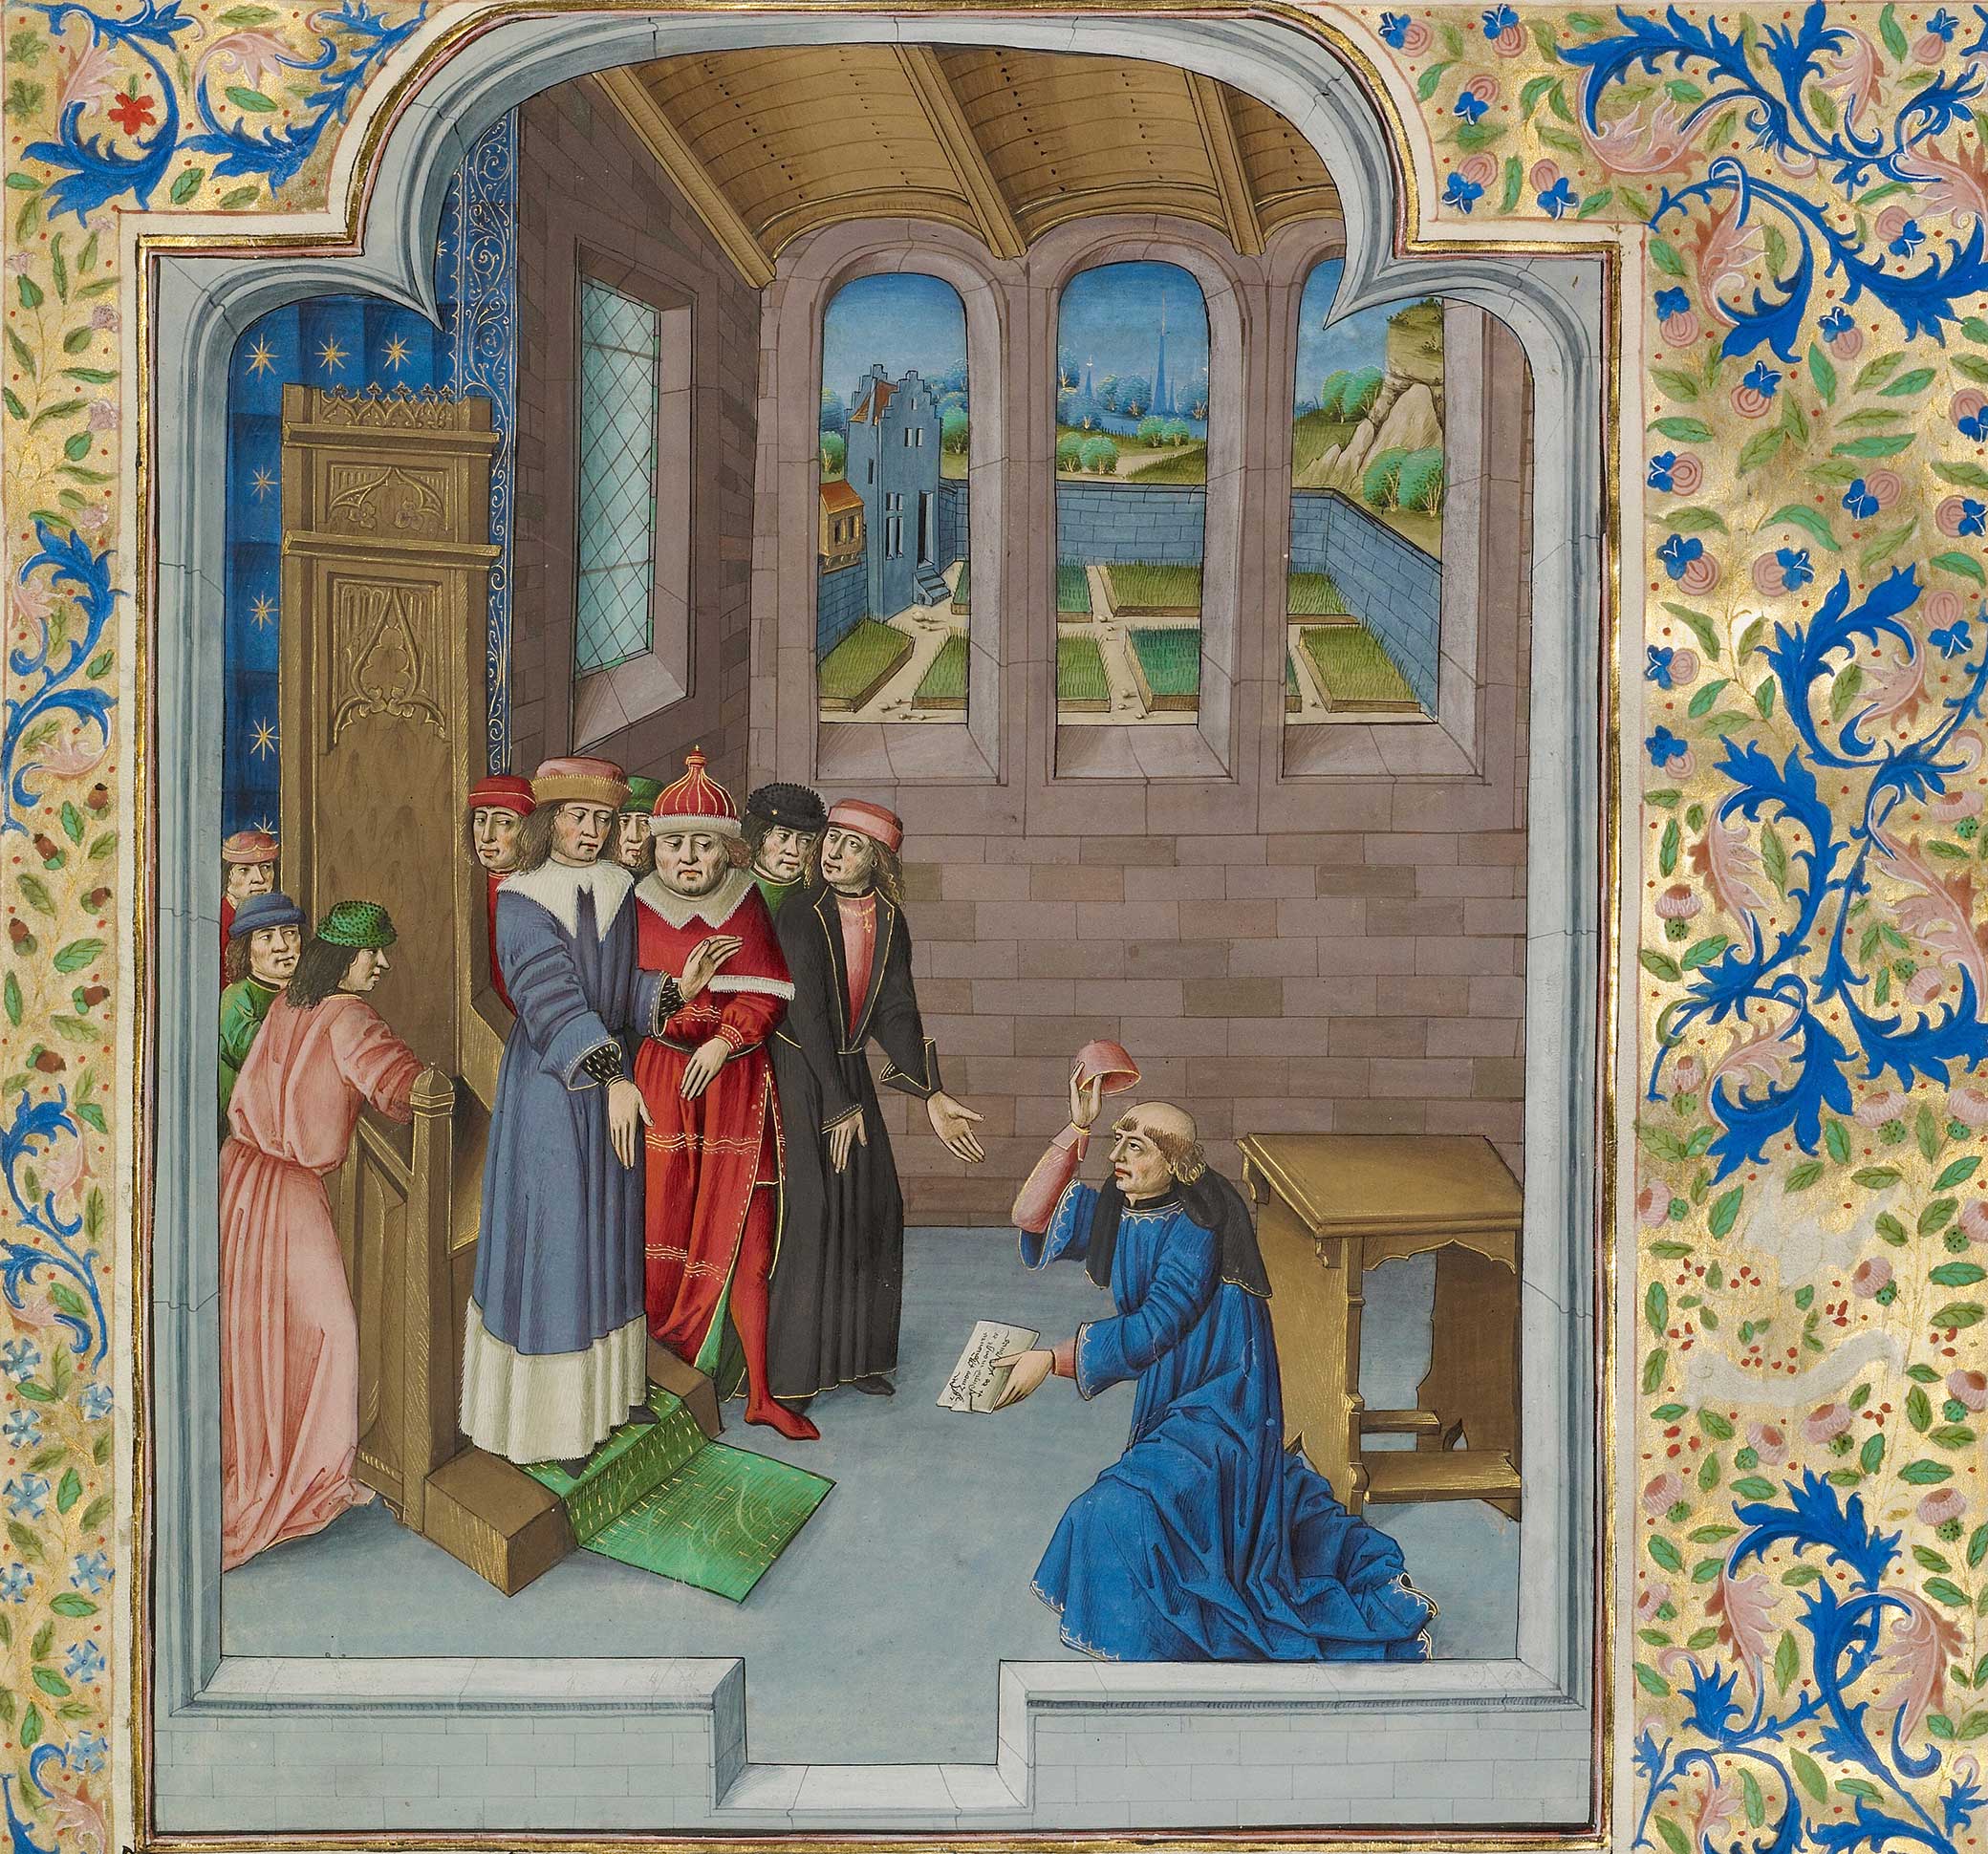 Froissart Kneeling Before Gaston Phébus, Count of Foix, by Master of the Soane Josephus, c. 1475. The J. Paul Getty Museum.